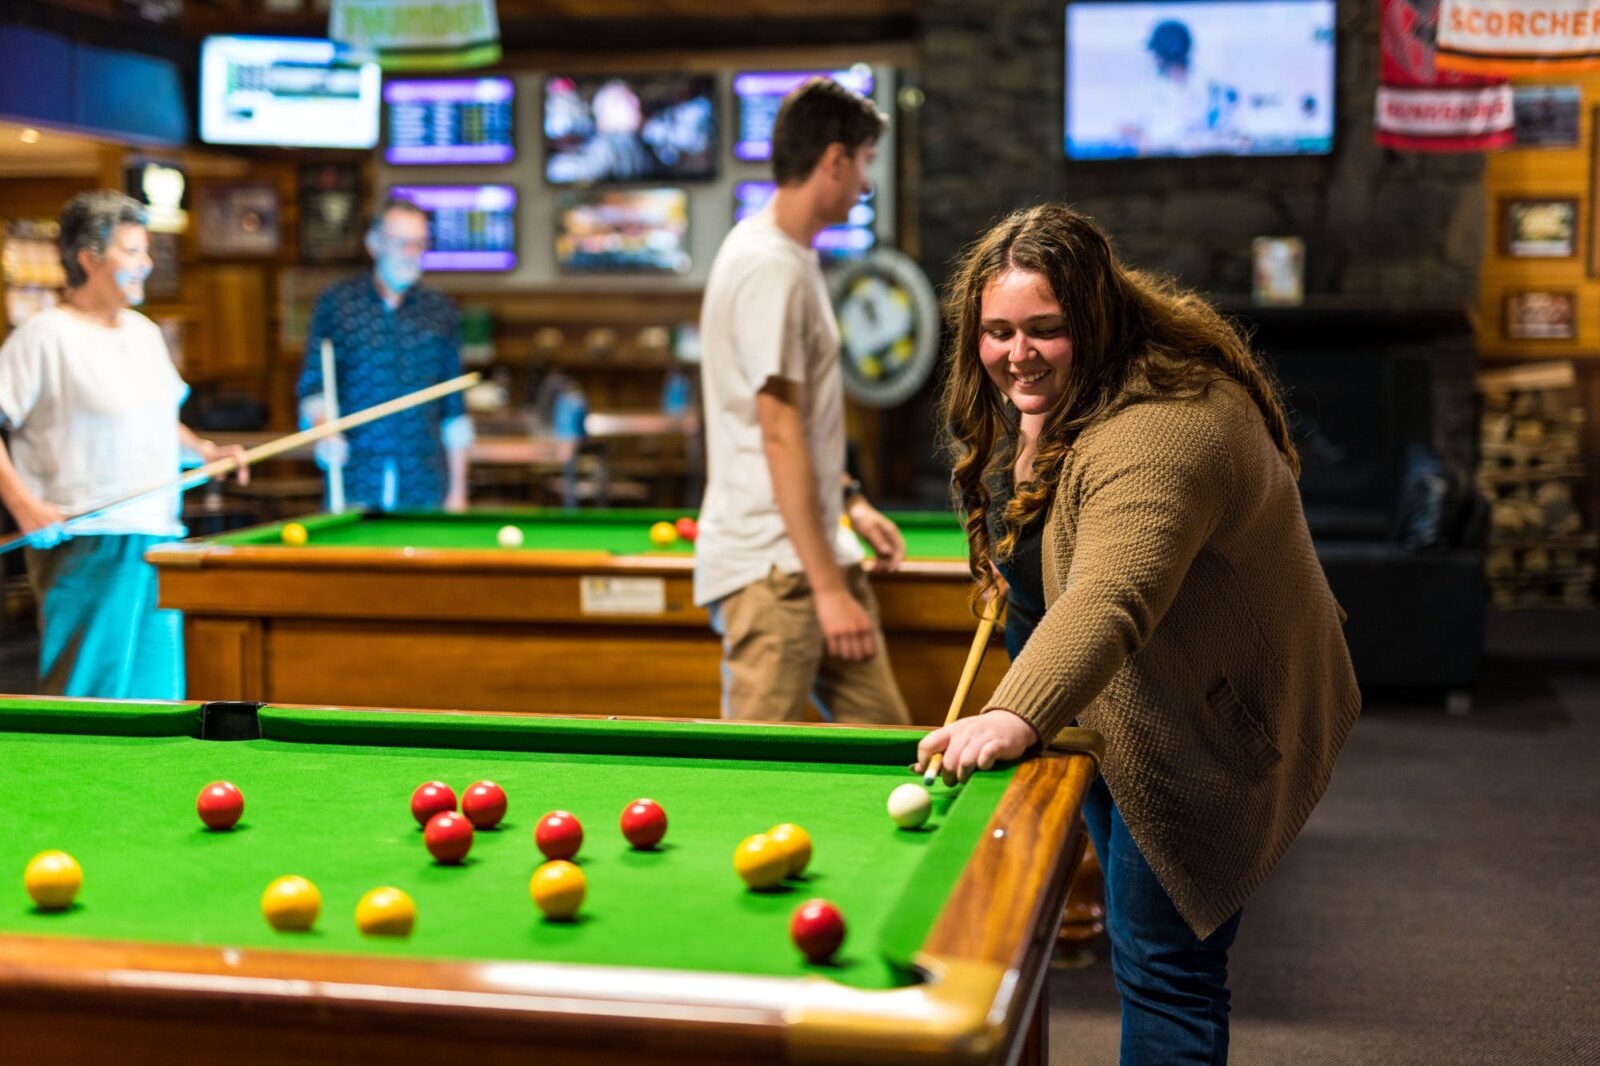 Young woman lining up a shot at one of the pool tables with a small group playing on table behind